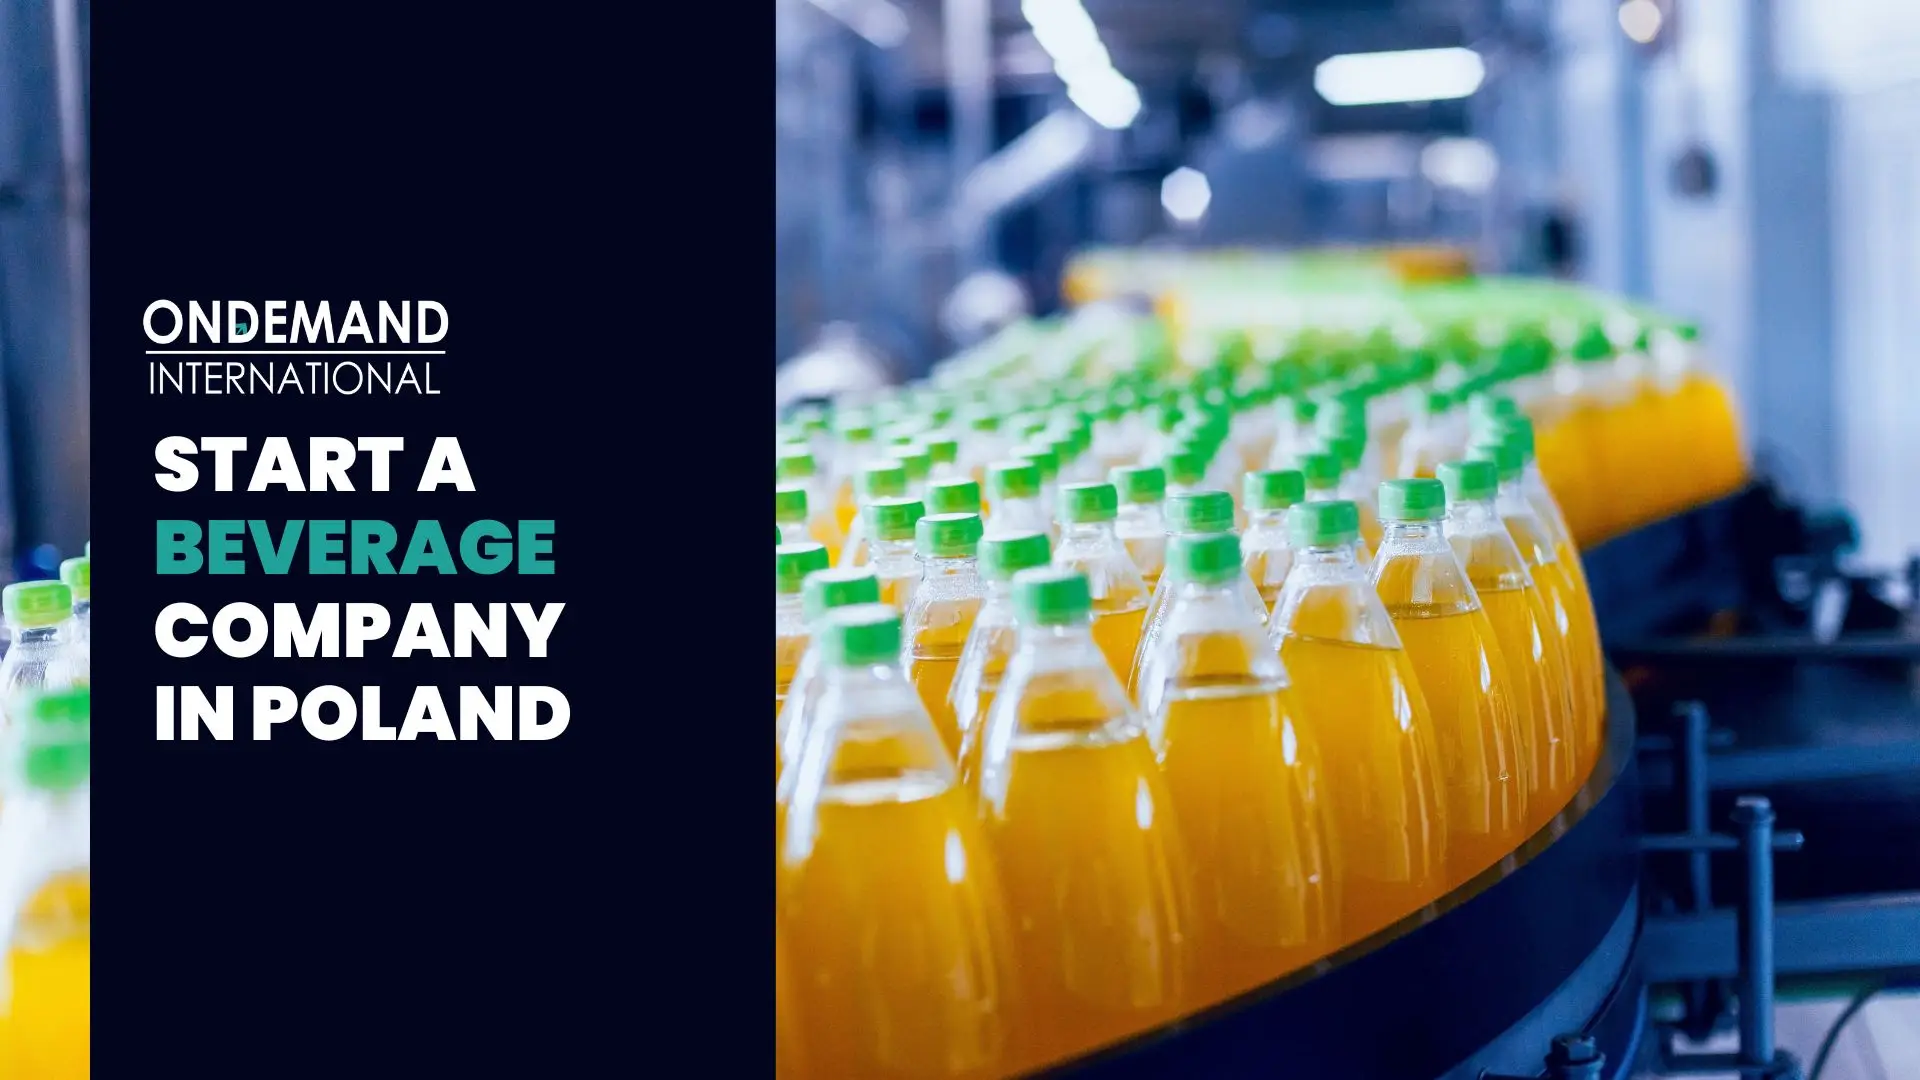 Start A Beverage Company in Poland